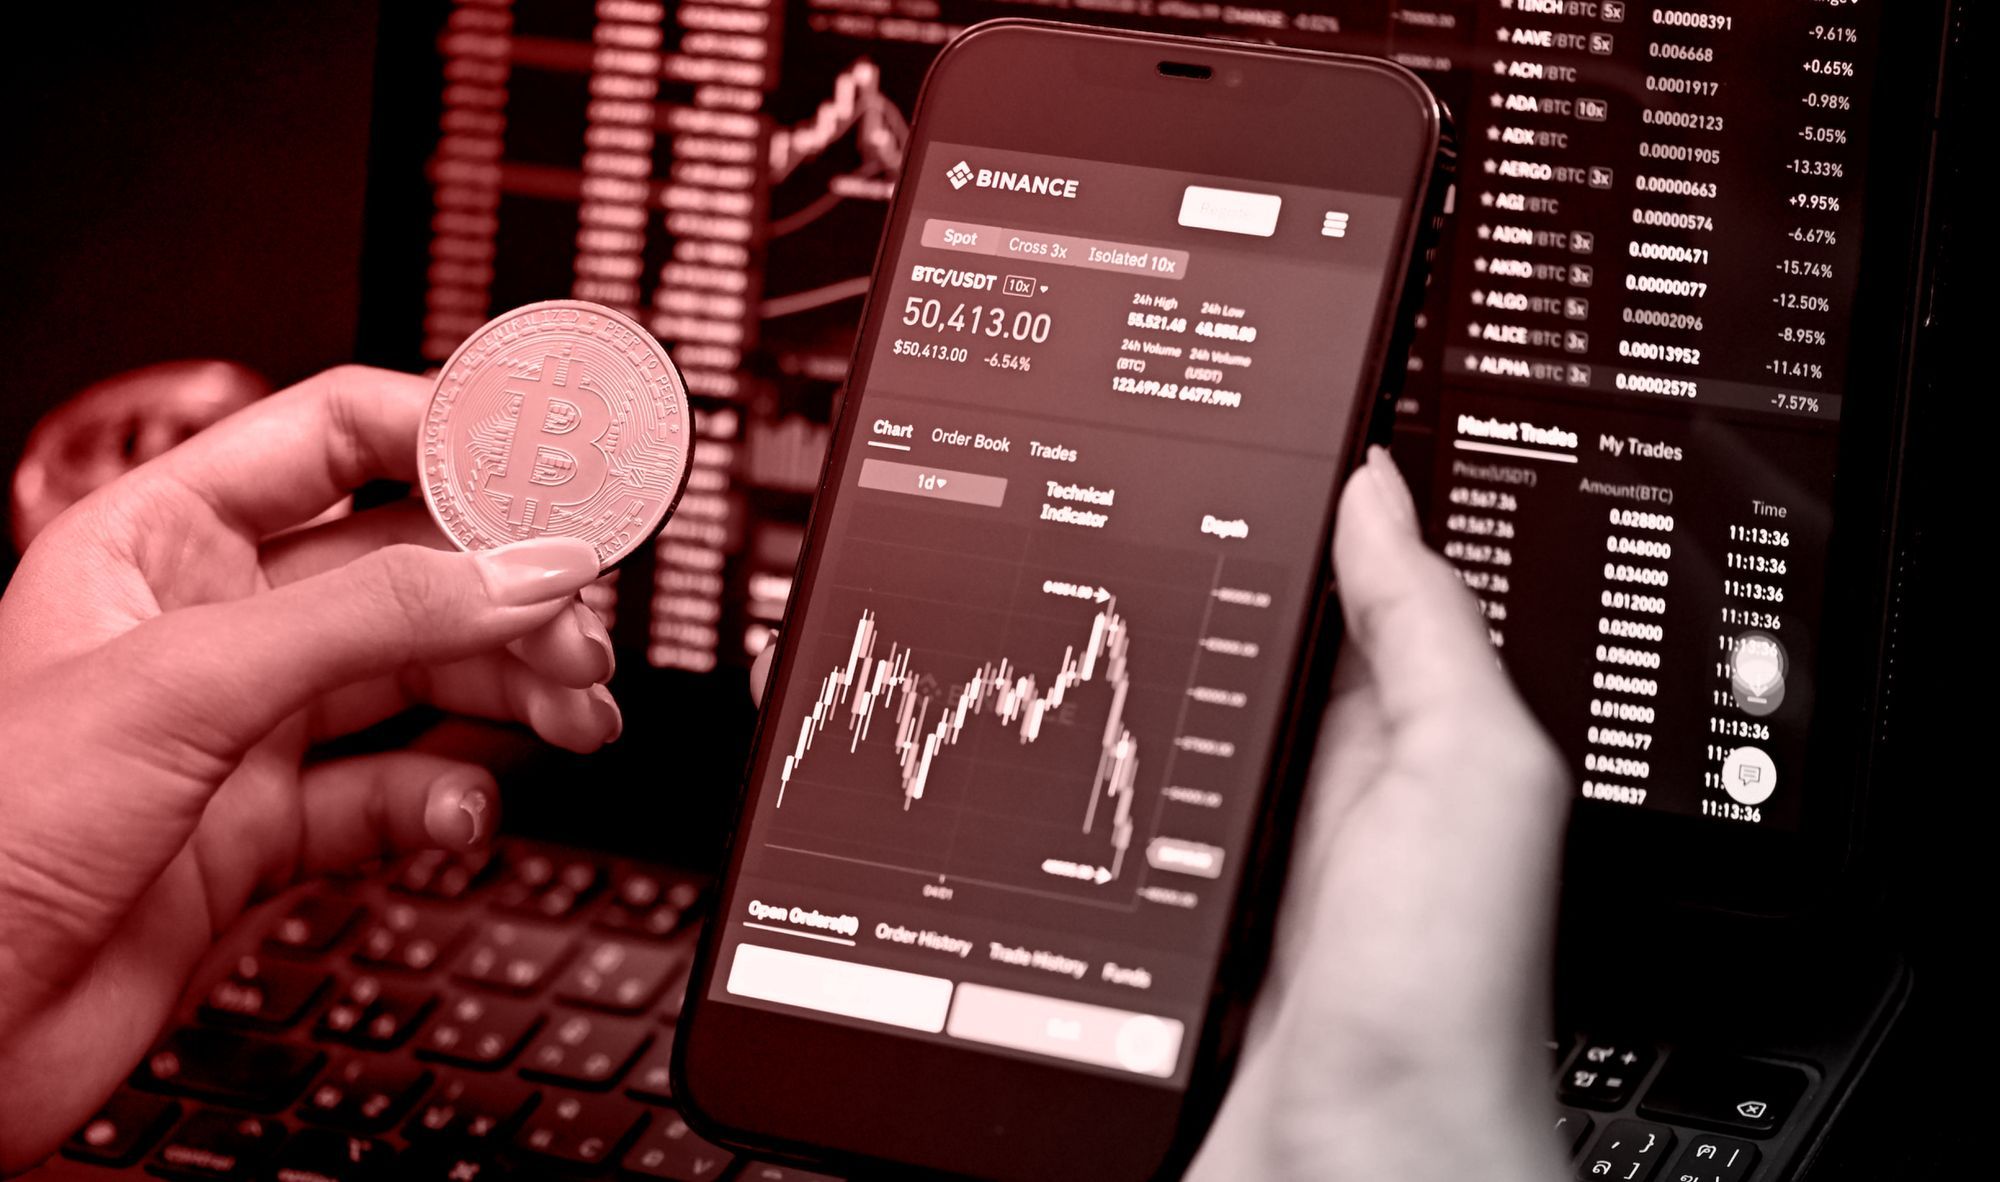 A hand holding a coin with bitcoin logo and a phone opened Binance app showing graph and numbers